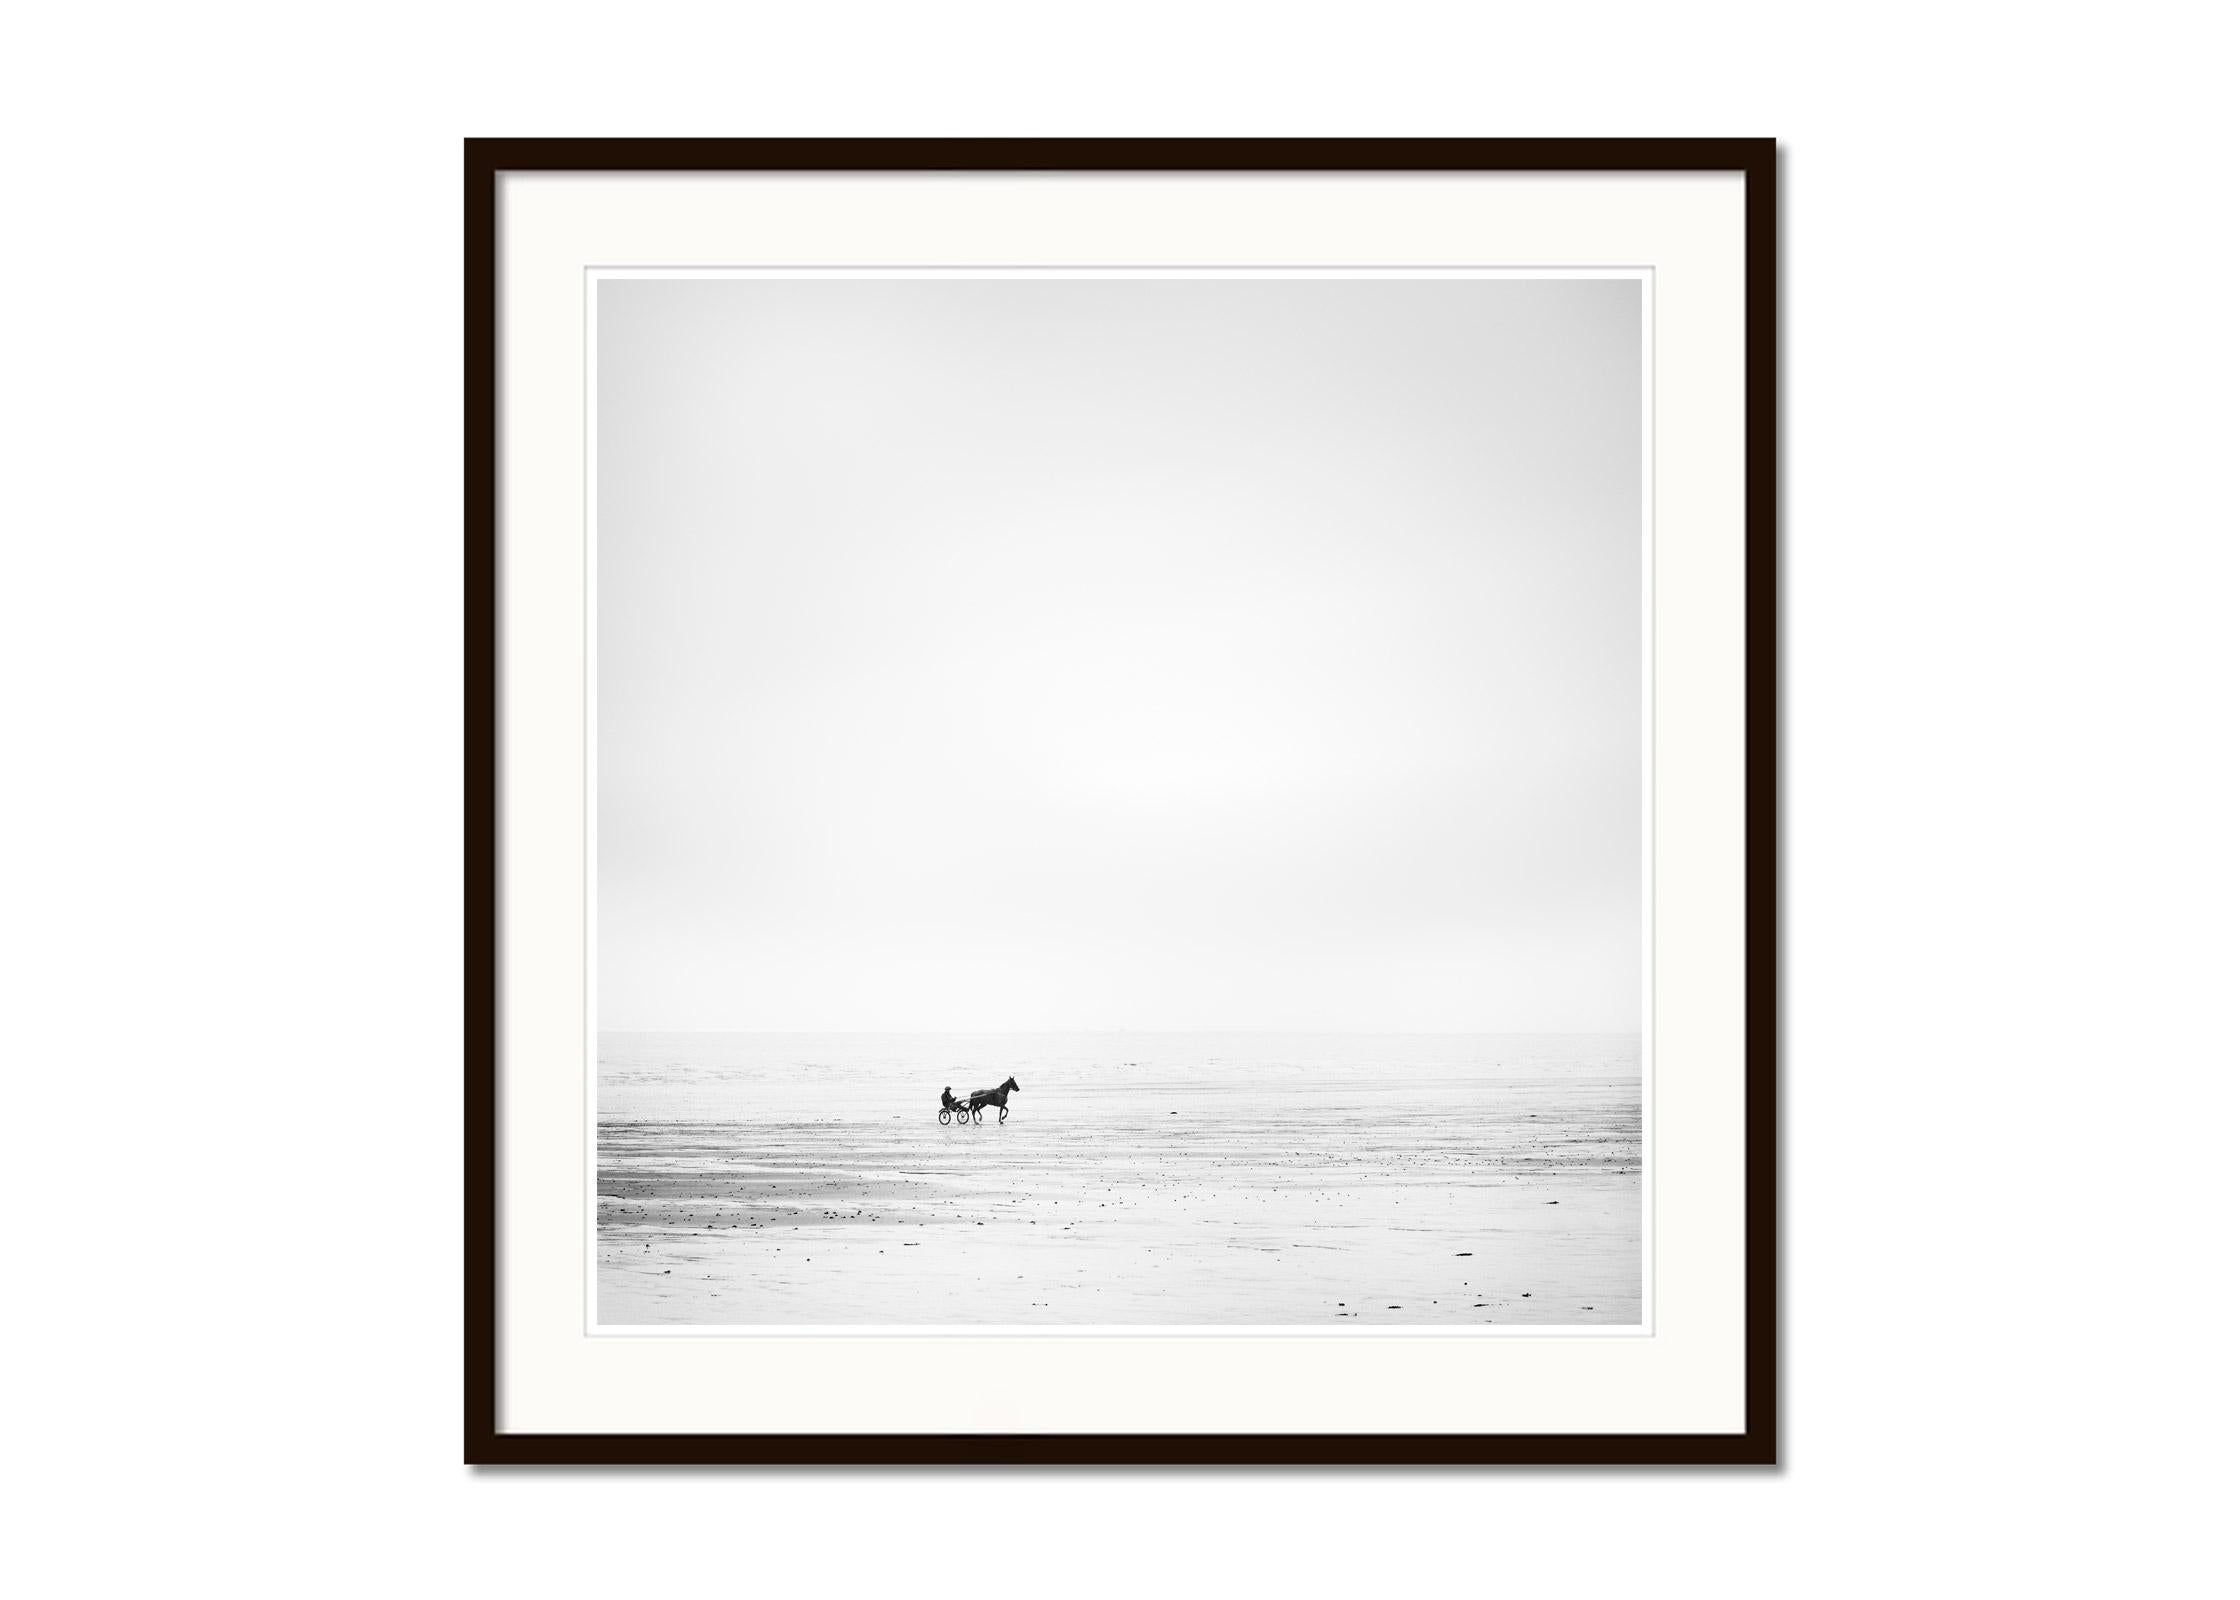 Harness Racing, lonely beach, horse, black and white photography, landscape, art - Gray Landscape Photograph by Gerald Berghammer